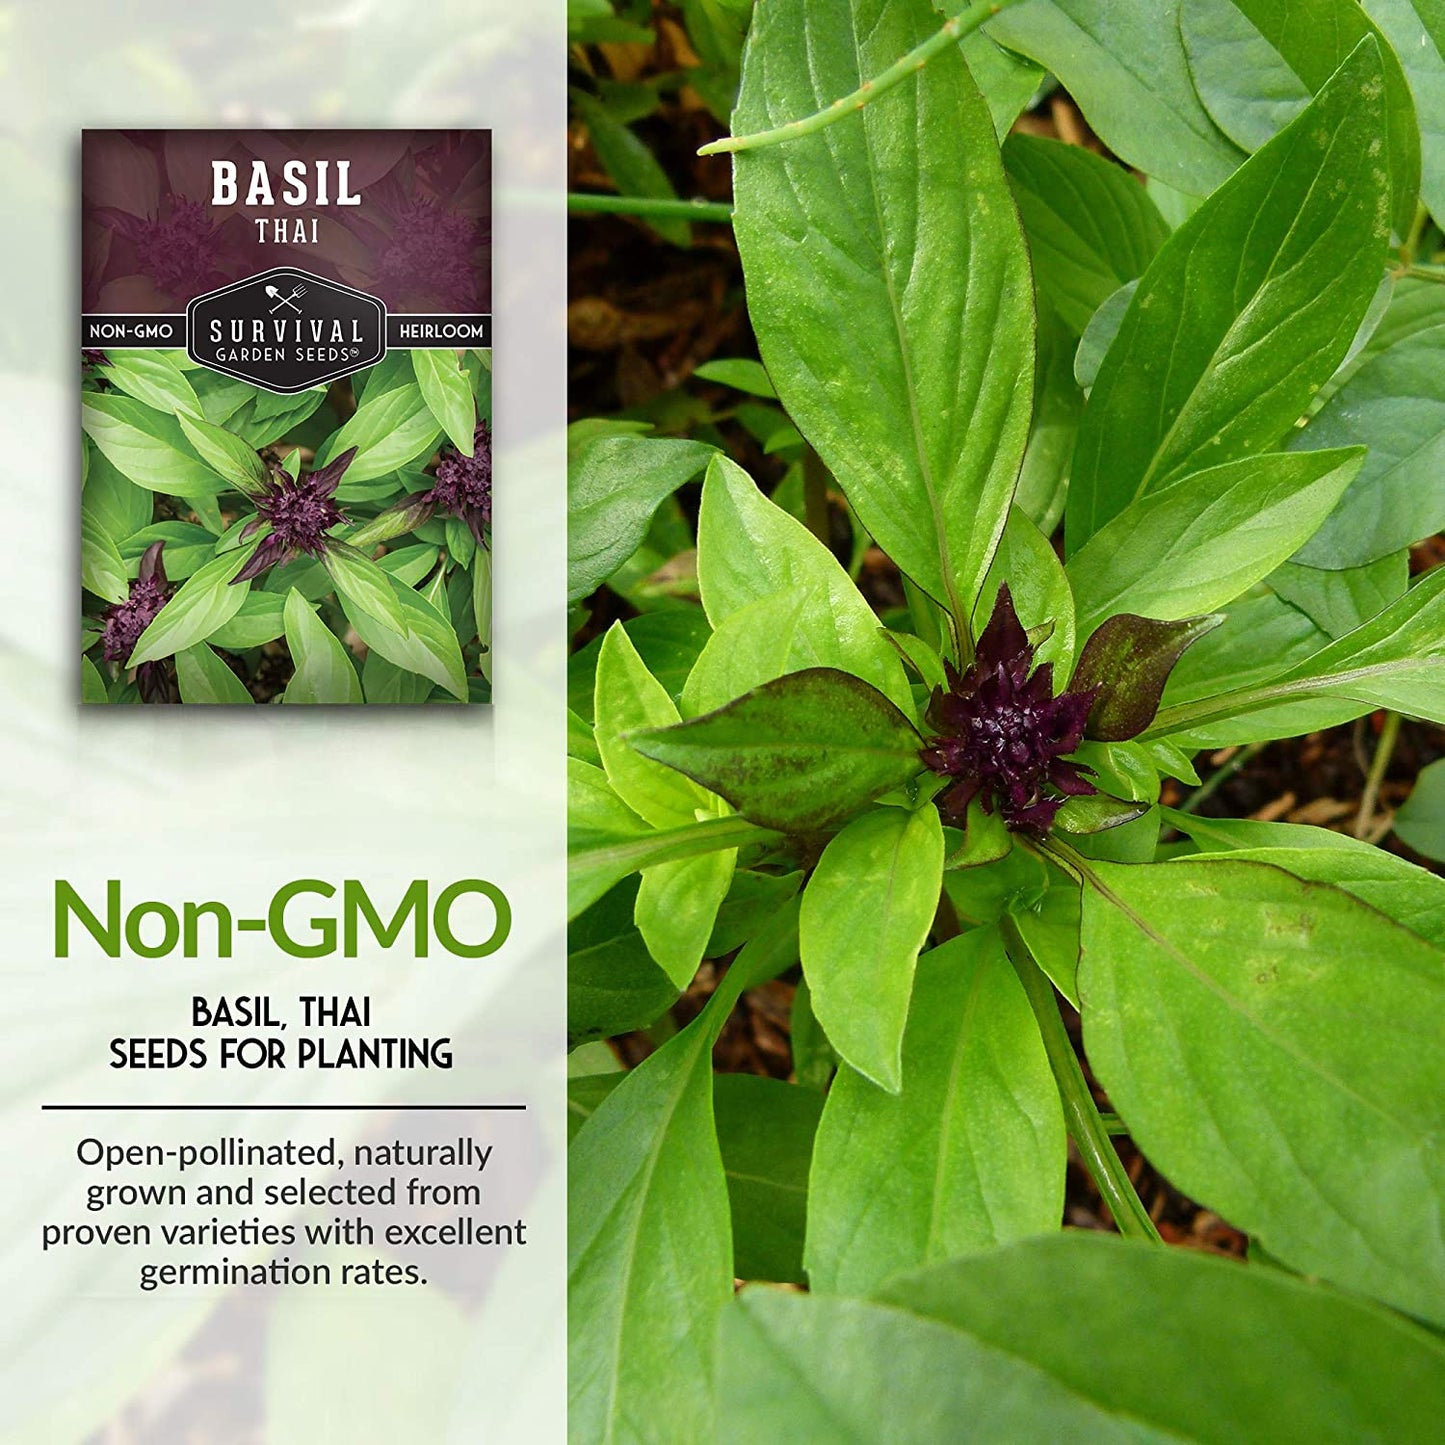 - Thai Basil Seed for Planting - Packet with Instructions to Plant and Grow Asian Basil Indoors or Outdoors in Your Home Vegetable Garden - Non-Gmo Heirloom Variety - 5 Pack